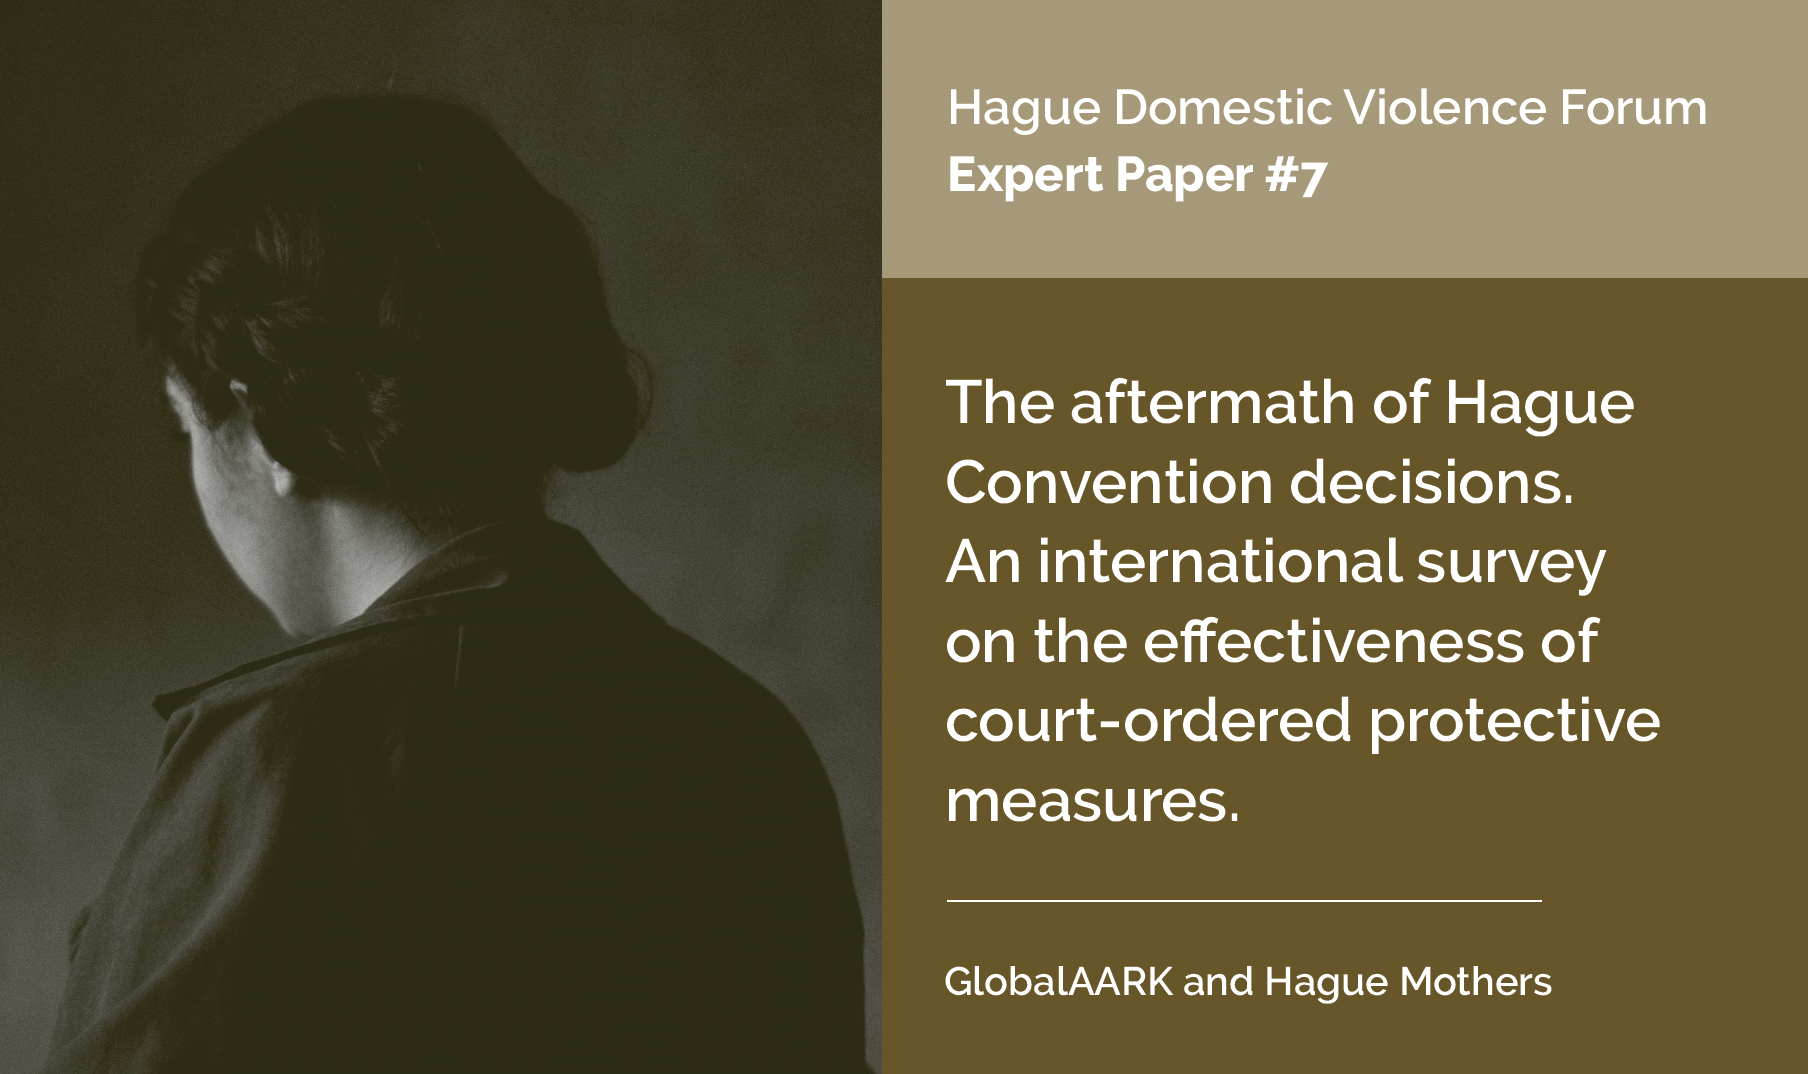 Expert Paper 7: The aftermath of Hague Convention decisions. An international survey on the effectiveness of court-ordered protective measures